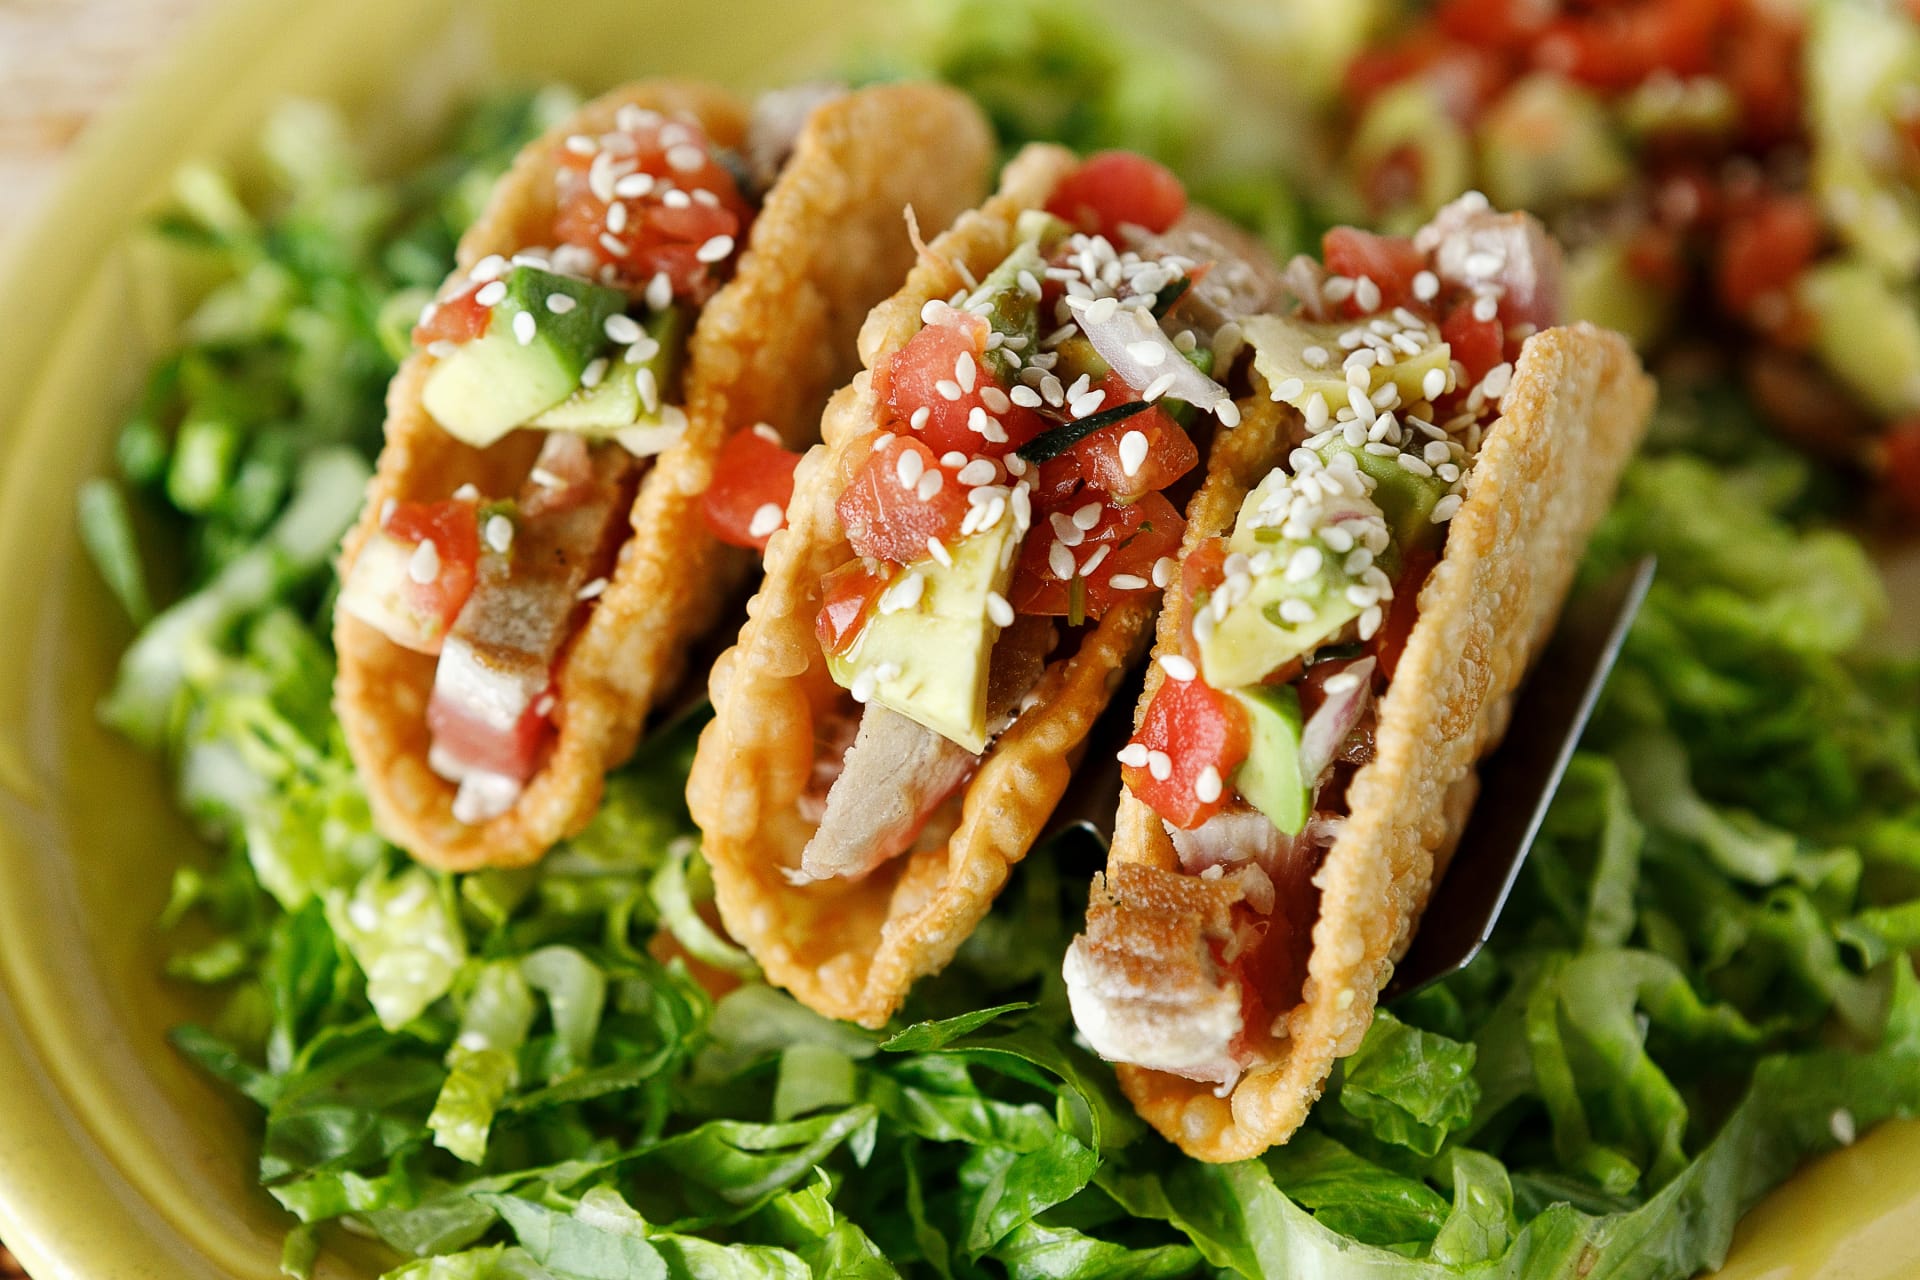 10 Fun Facts About Tacos